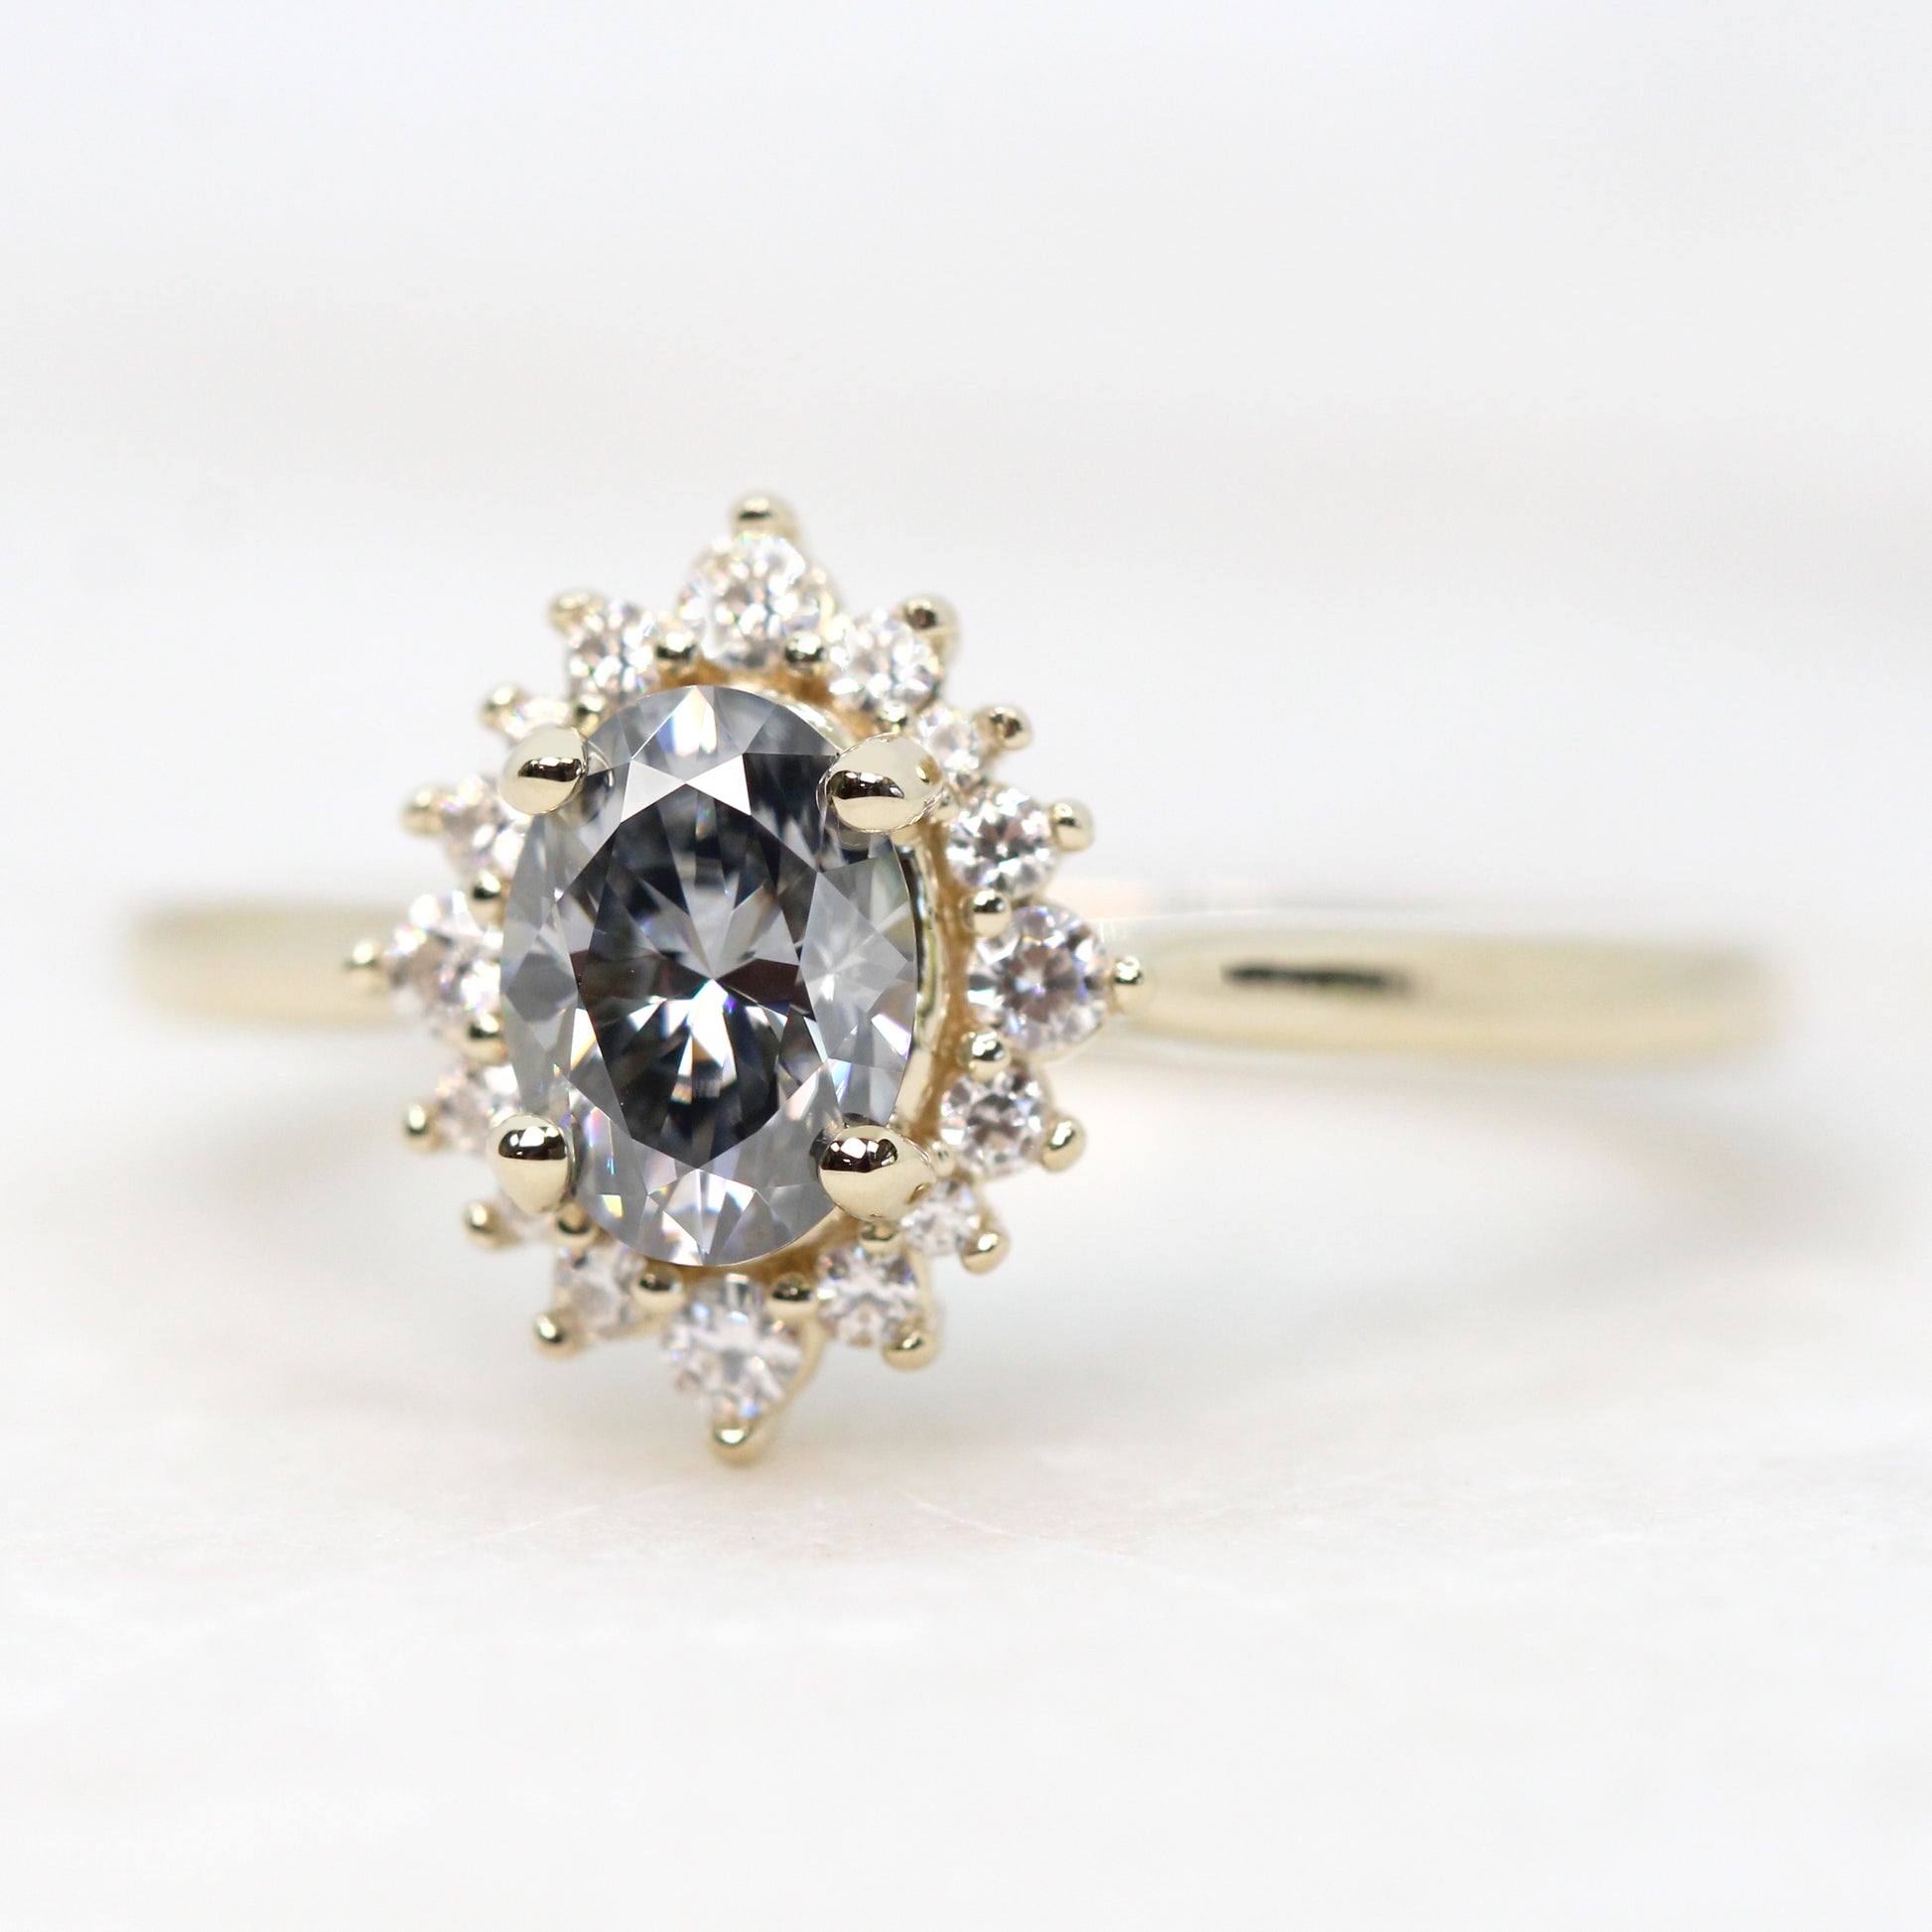 Lena Ring with an Gray Oval Moissanite and Moissanite Accents - Made to Order, Choose Your Gold Tone - Midwinter Co. Alternative Bridal Rings and Modern Fine Jewelry